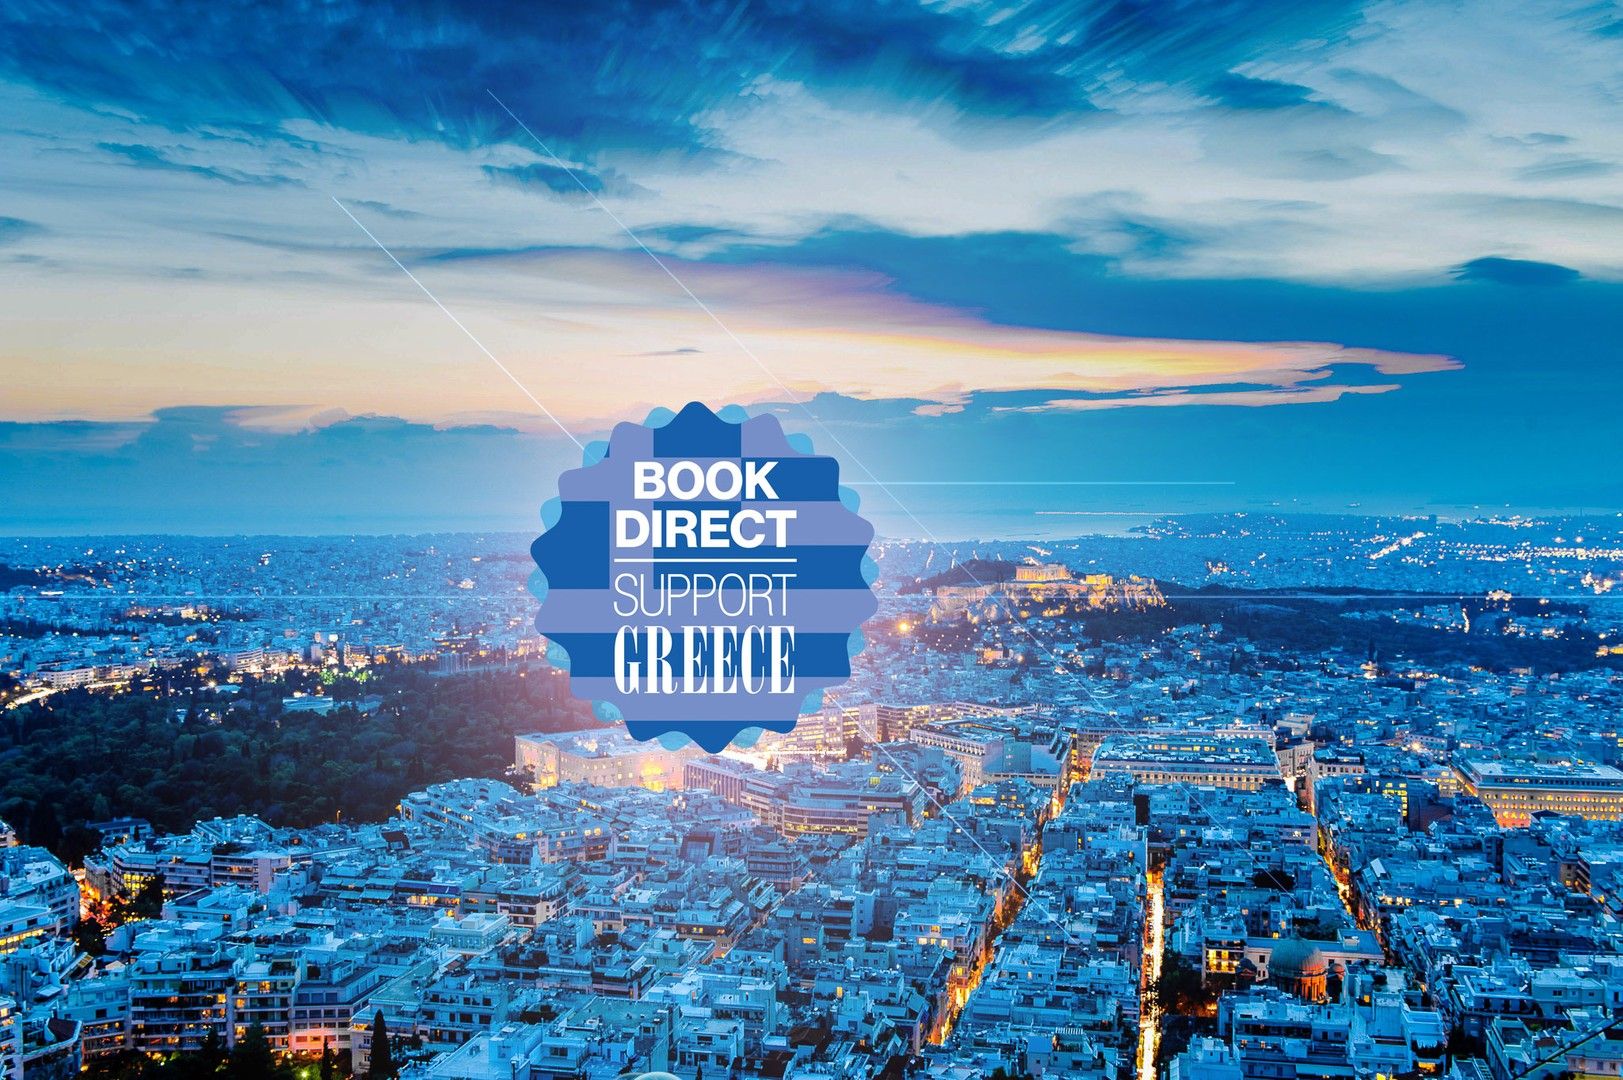 WebHotelier launches Book Direct - Support Greece initiative